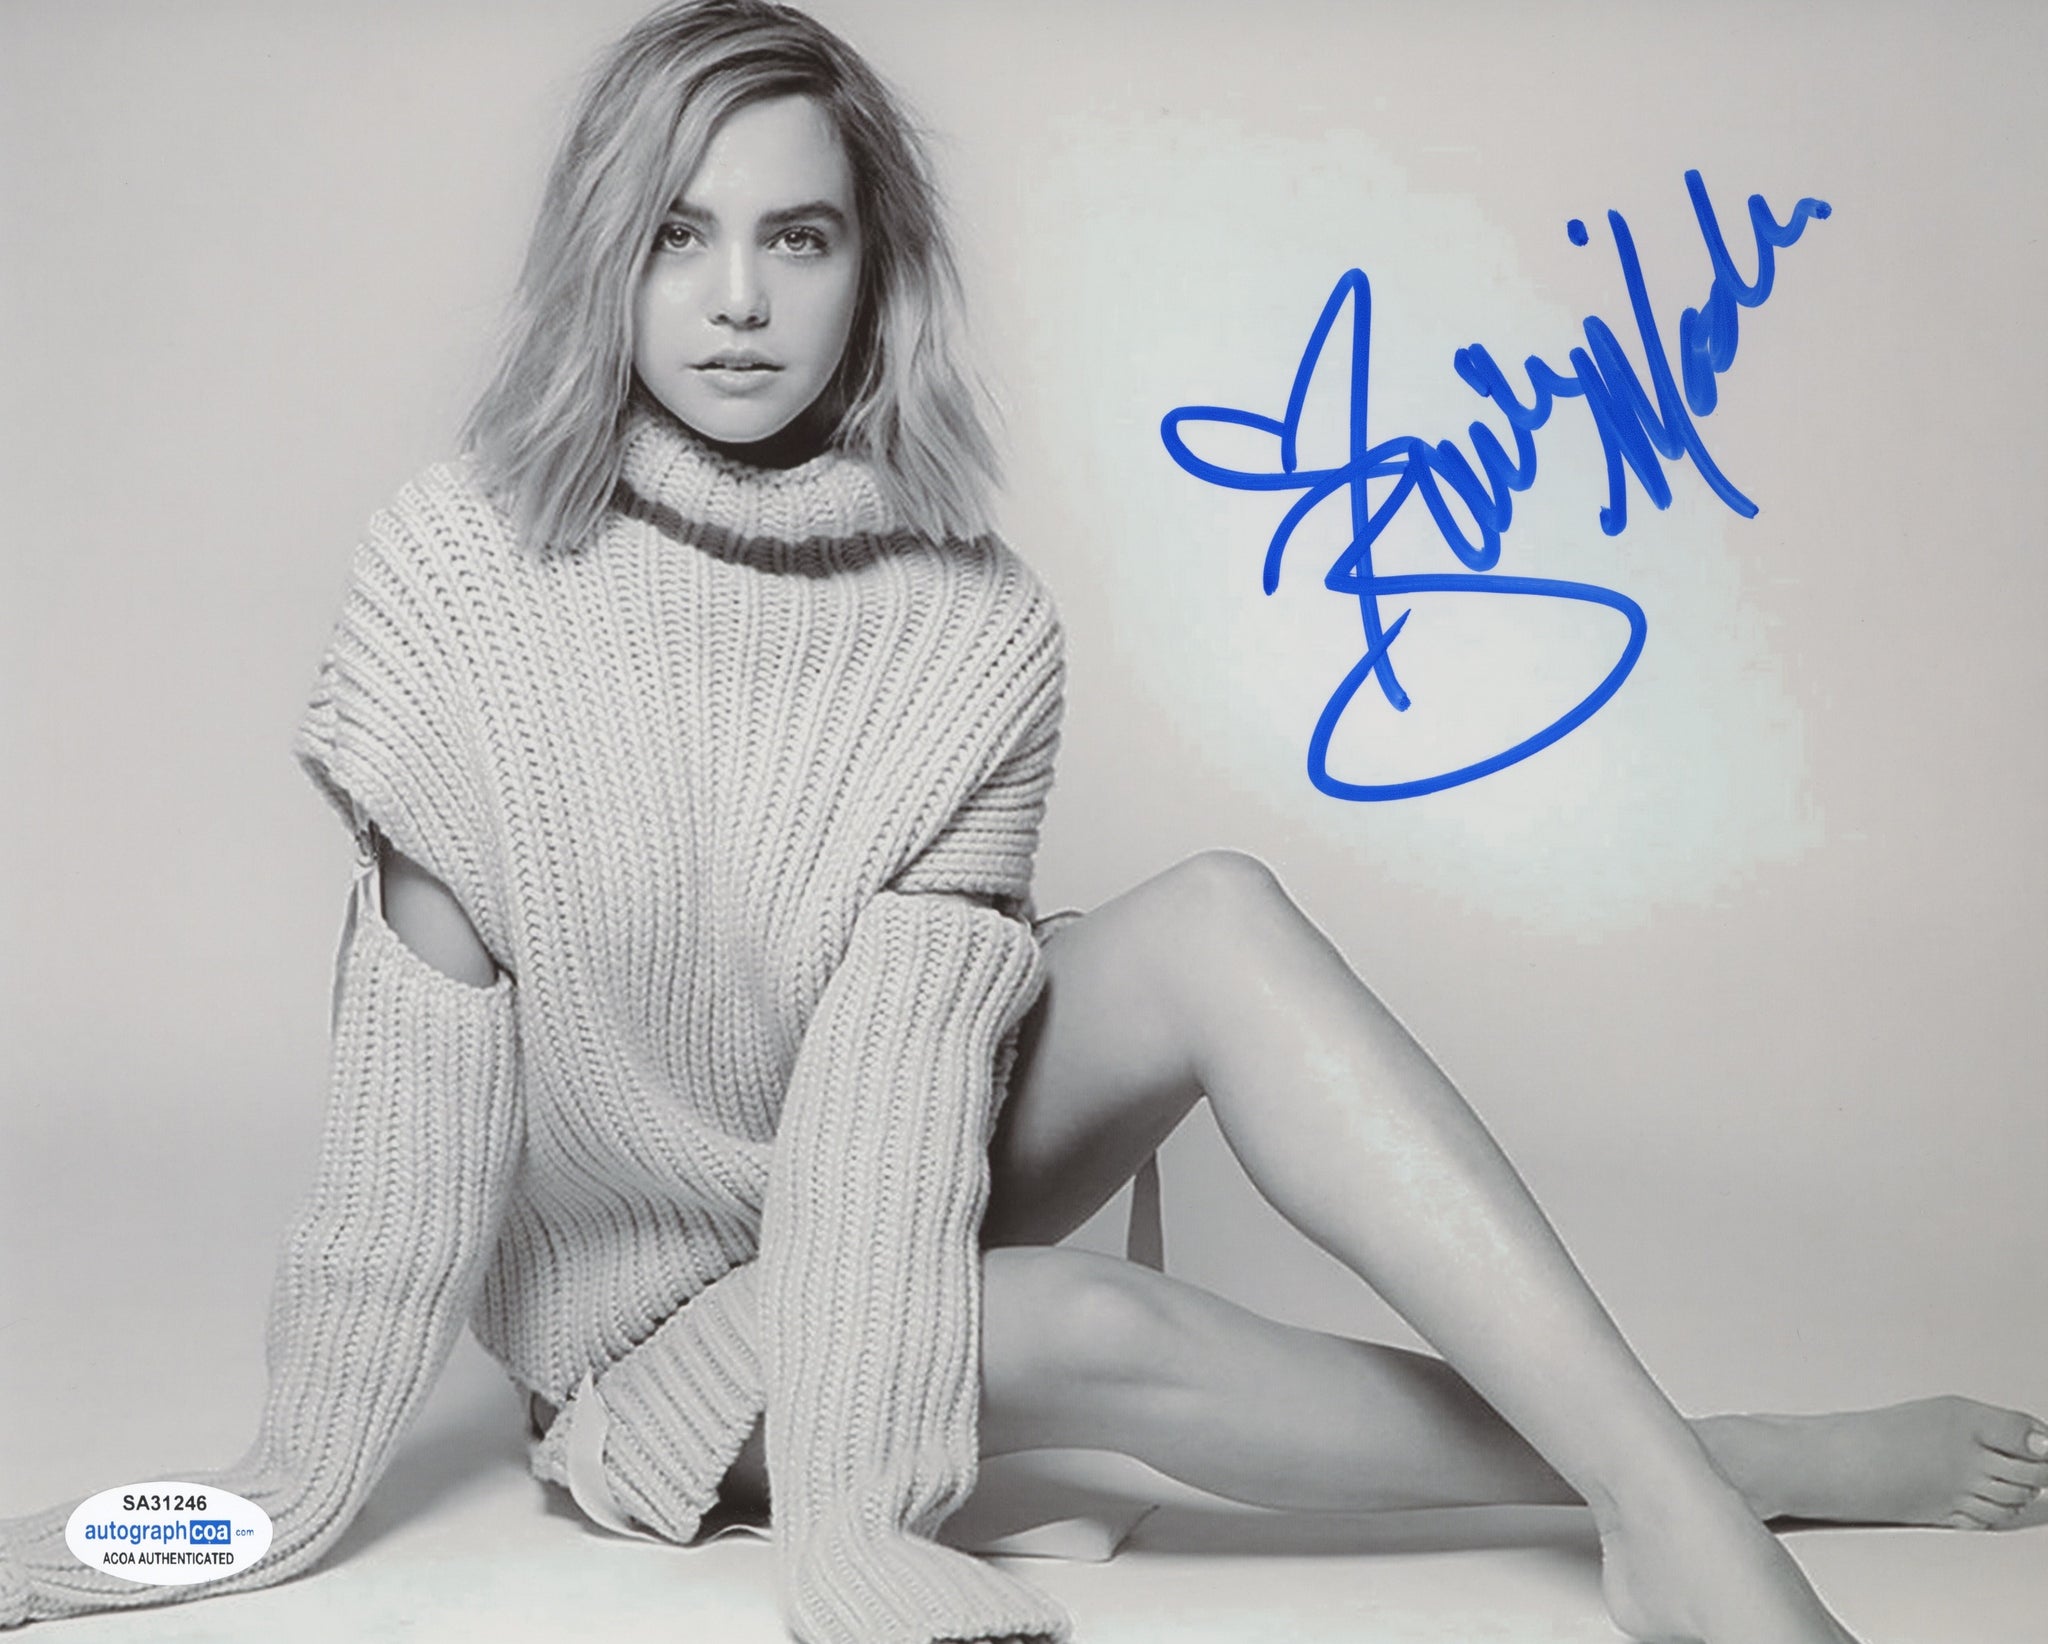 Bailee Madison Sexy Signed Autograph 8x10 Photo ACOA #30 - Outlaw Hobbies Authentic Autographs